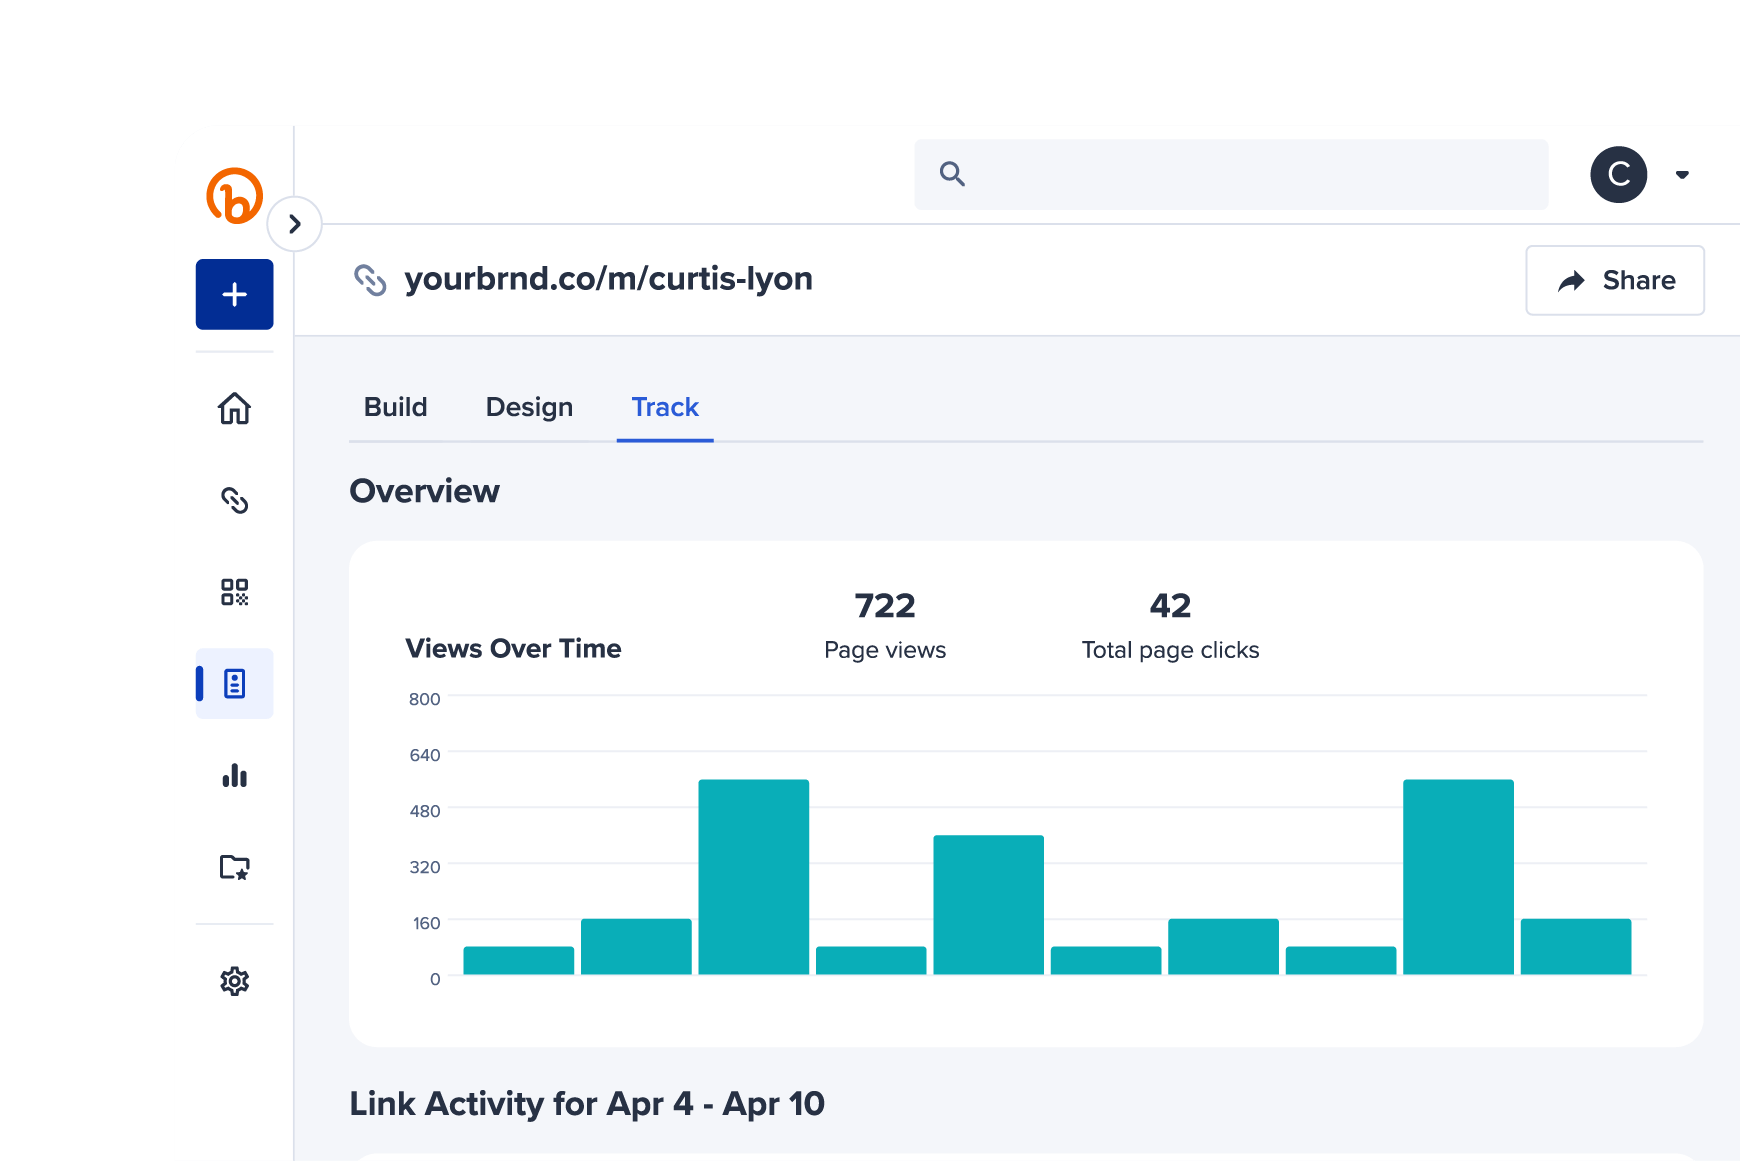 Inside Bitly's Connections Platform with a bar chart